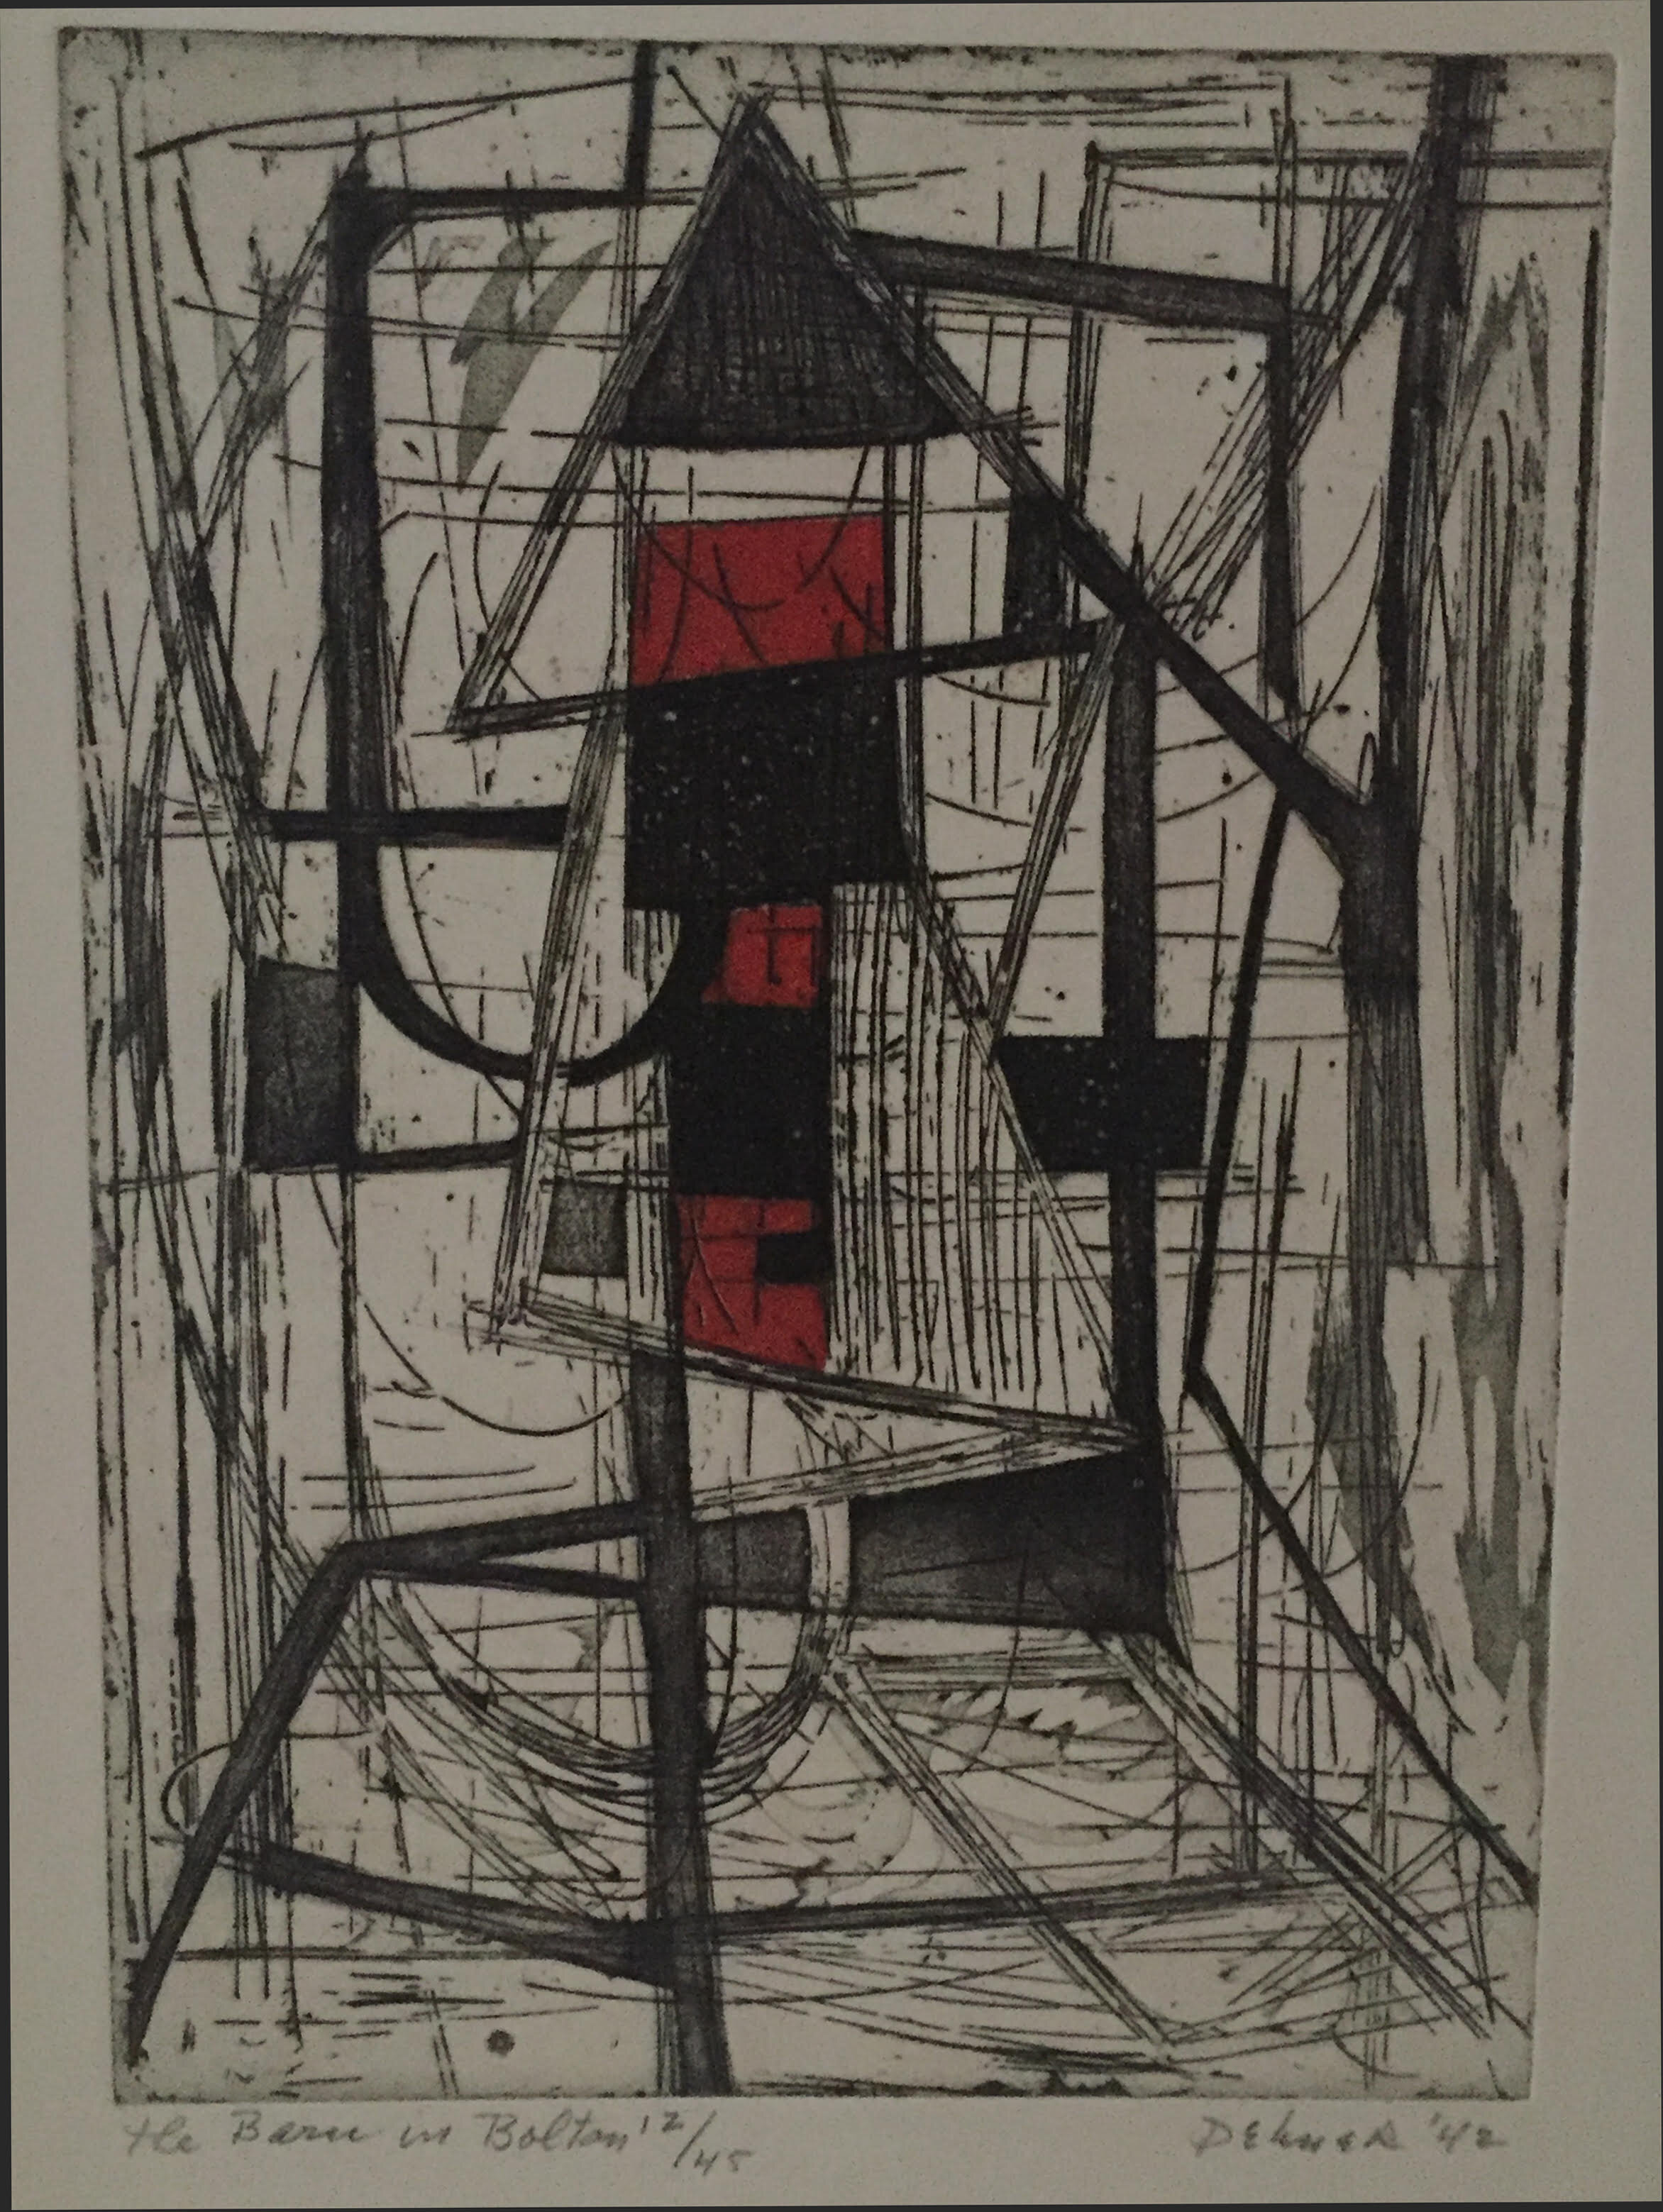 etching of black strokes forming triangular shapes and curves with pops of red in the center